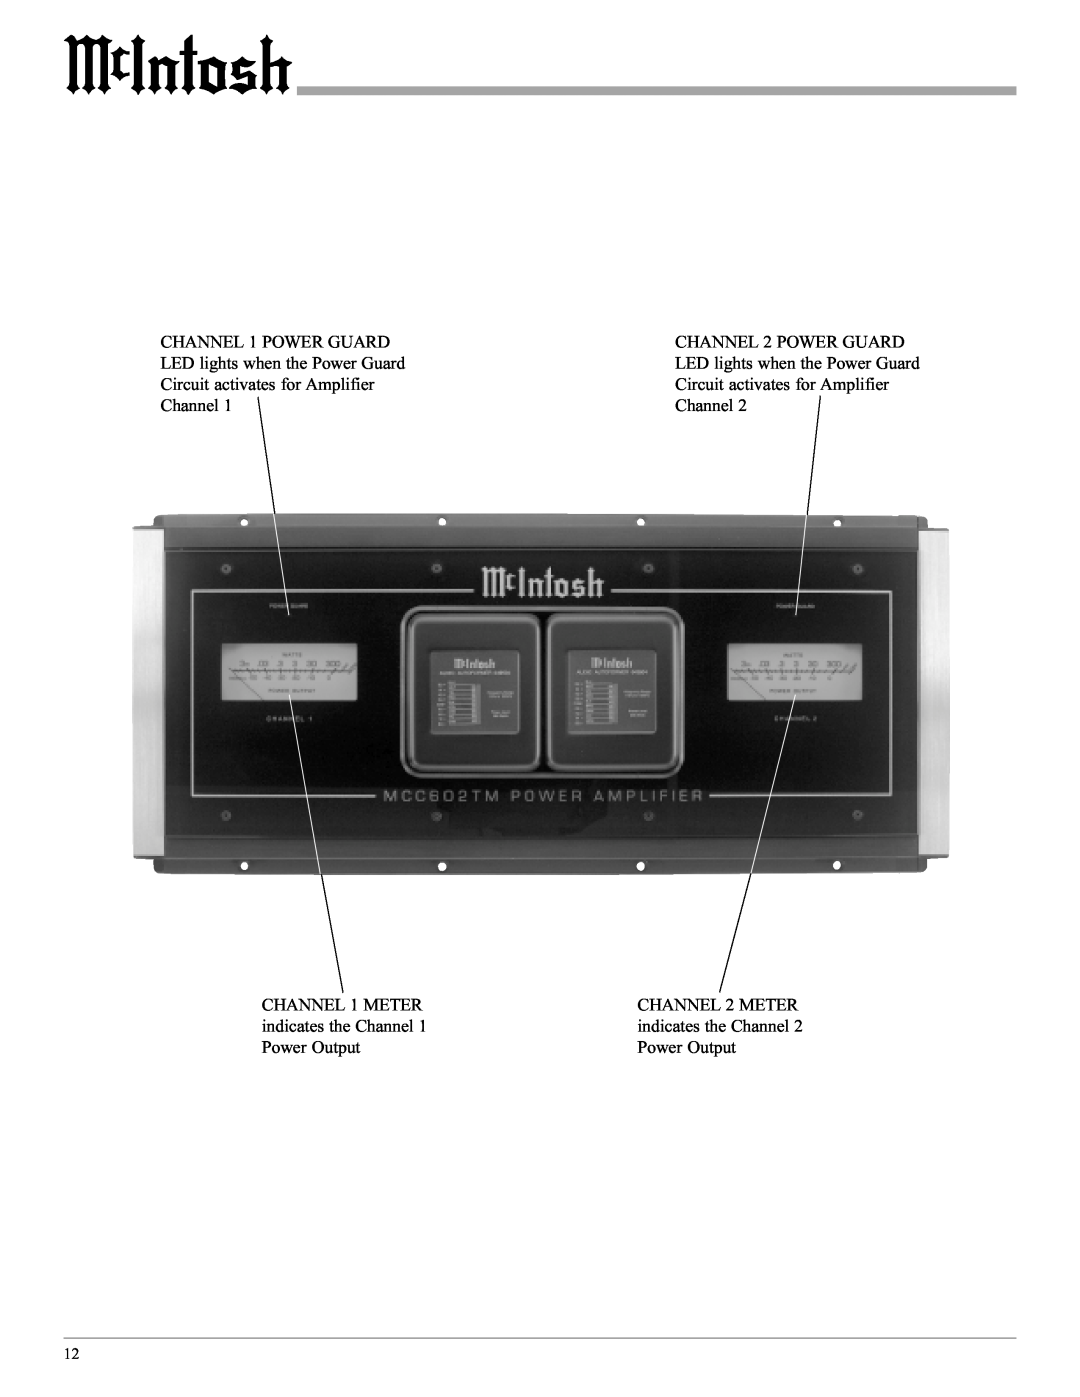 McIntosh MCC602TM manual CHANNEL 1 POWER GUARD LED lights when the Power Guard Circuit activates for Amplifier Channel 